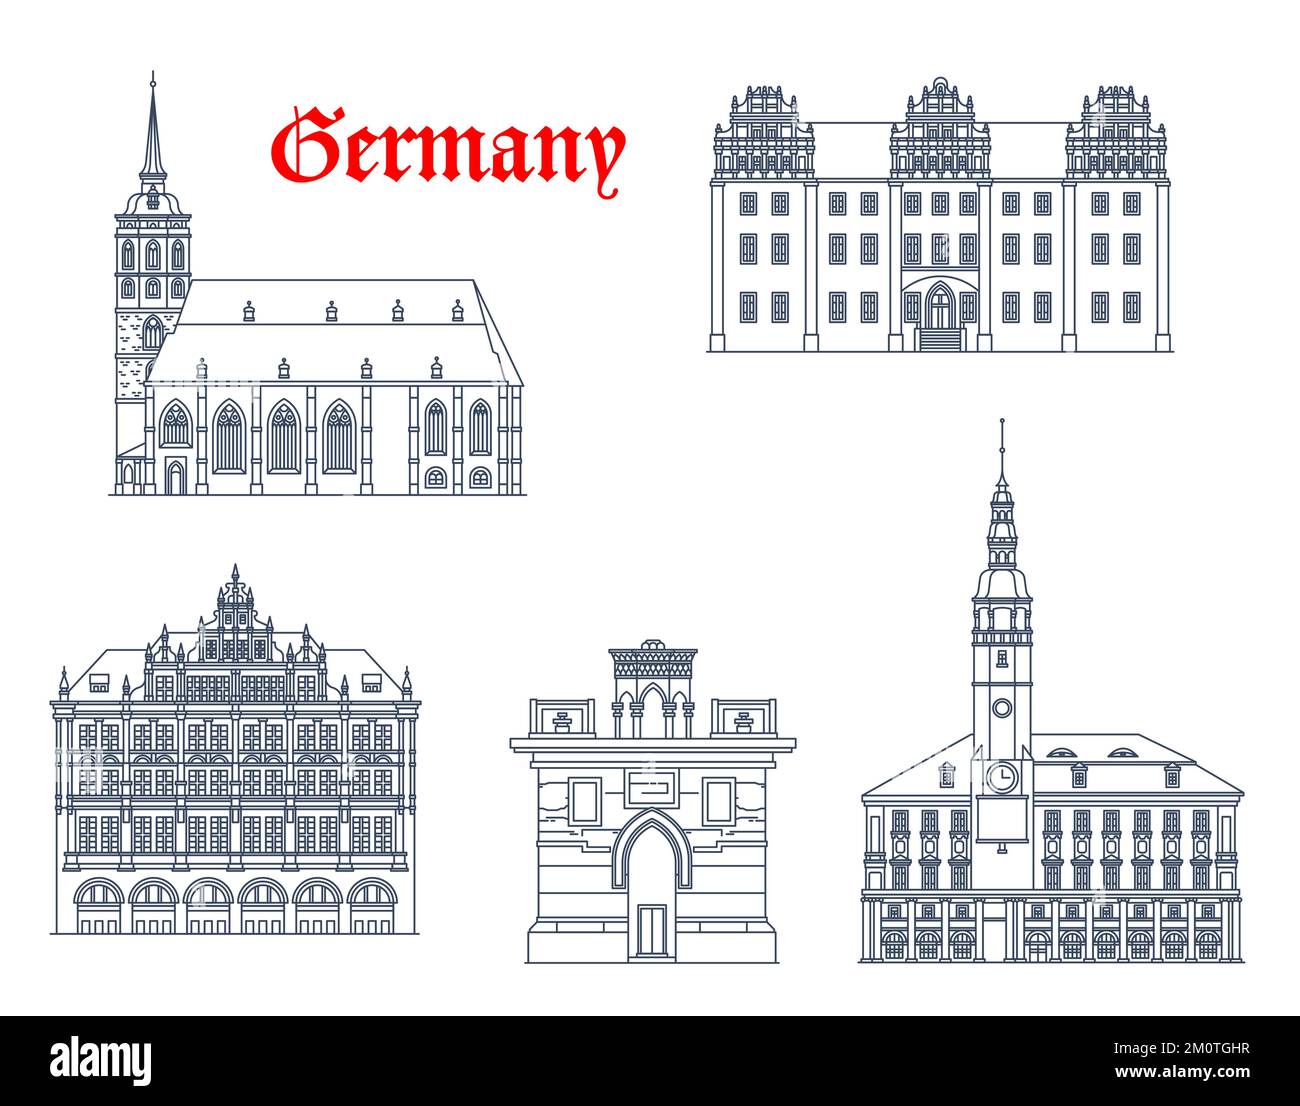 Germany, Bautzen and Gorlitz architecture buildings, vector travel landmarks. German Saxony buildings of St Peter cathedral, Ortenburg castle, Rathaus City Hall and Holy Sepulchre or Grave monument Stock Vector